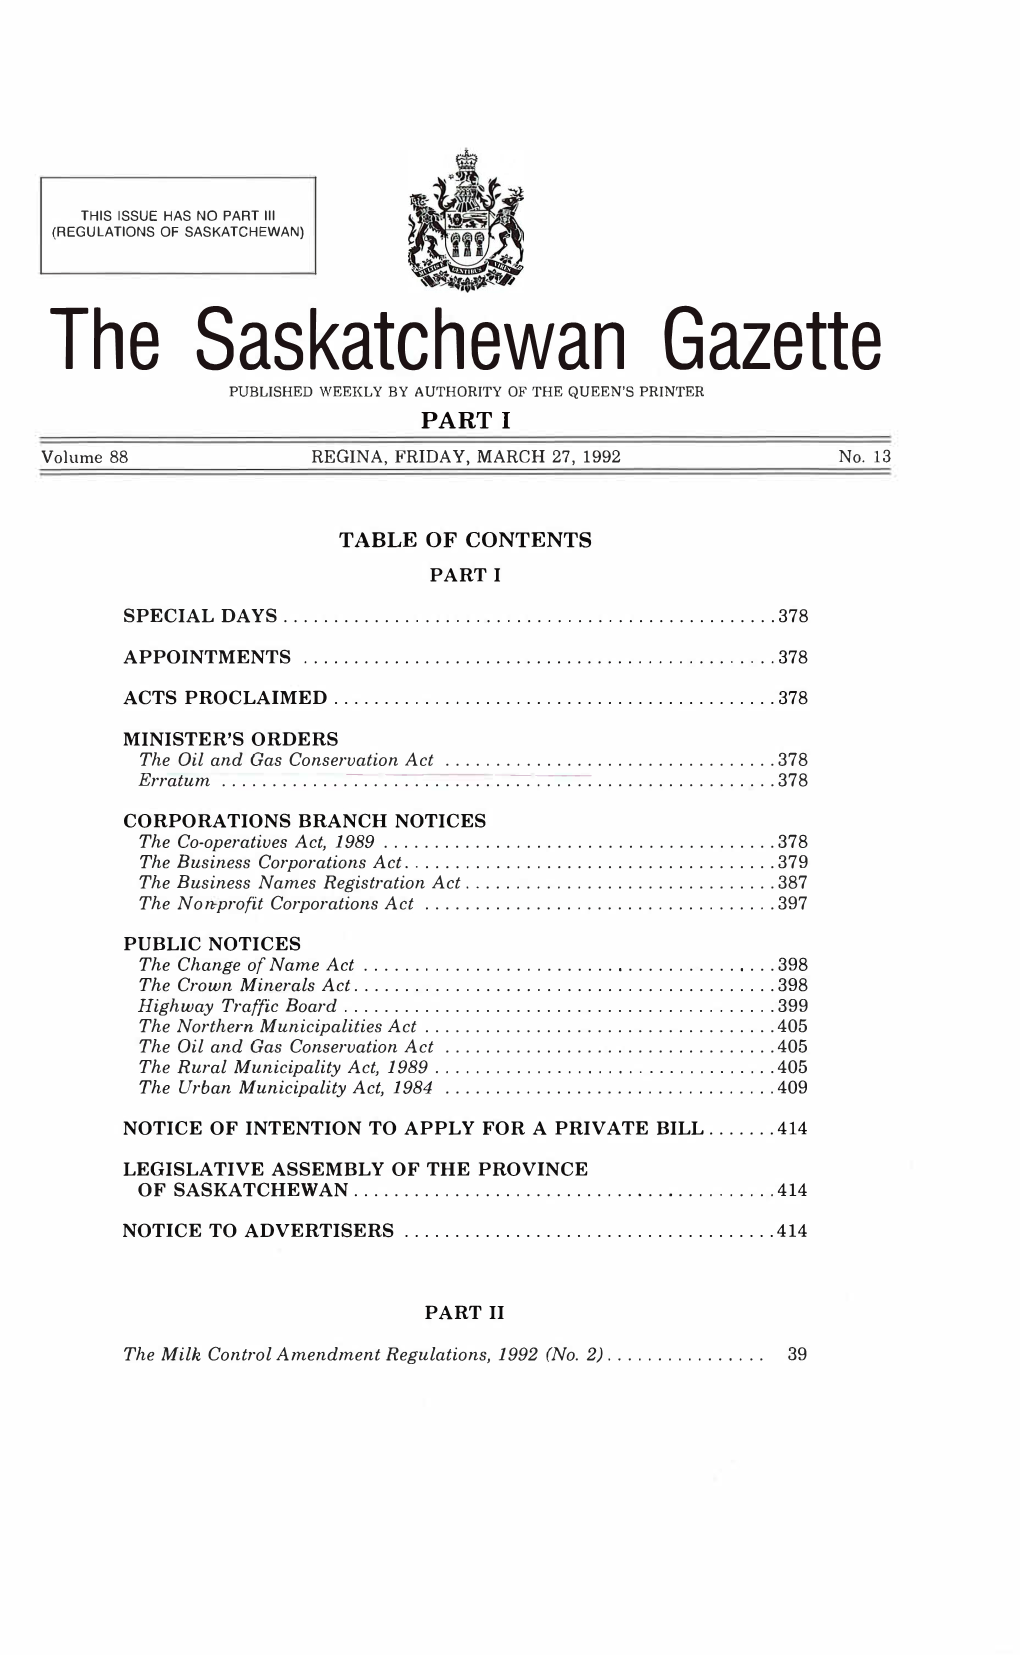 The Saskatchewan Gazette PUBLISHED WEEKLY by AUTHORITY of the QUEEN's PRINTER PART I Volume 88 REGINA, FRIDAY, MARCH 27, 1992 No